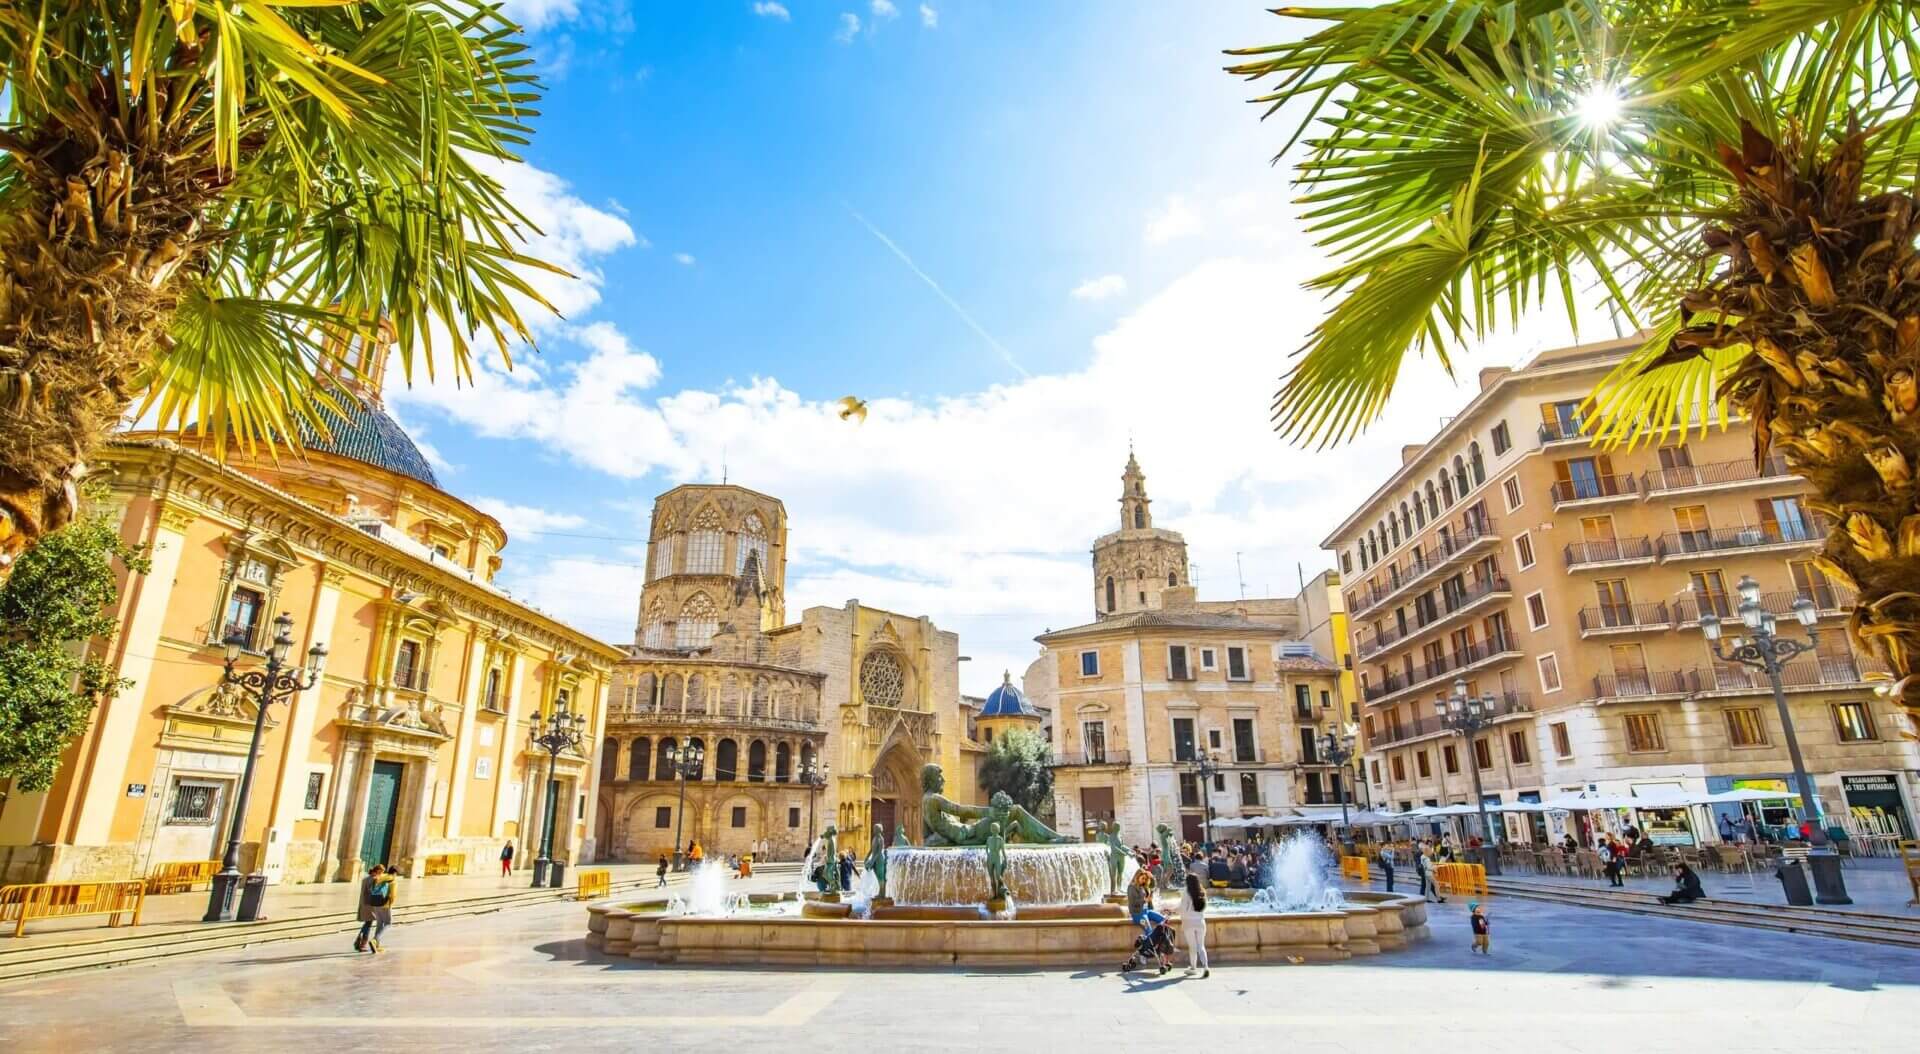 valencia-spain-4-march-2020-panoramic-view-of-plaza-de-la-virgen-square-of-virgin-saint-mary-and-old-town-stockpack-istock